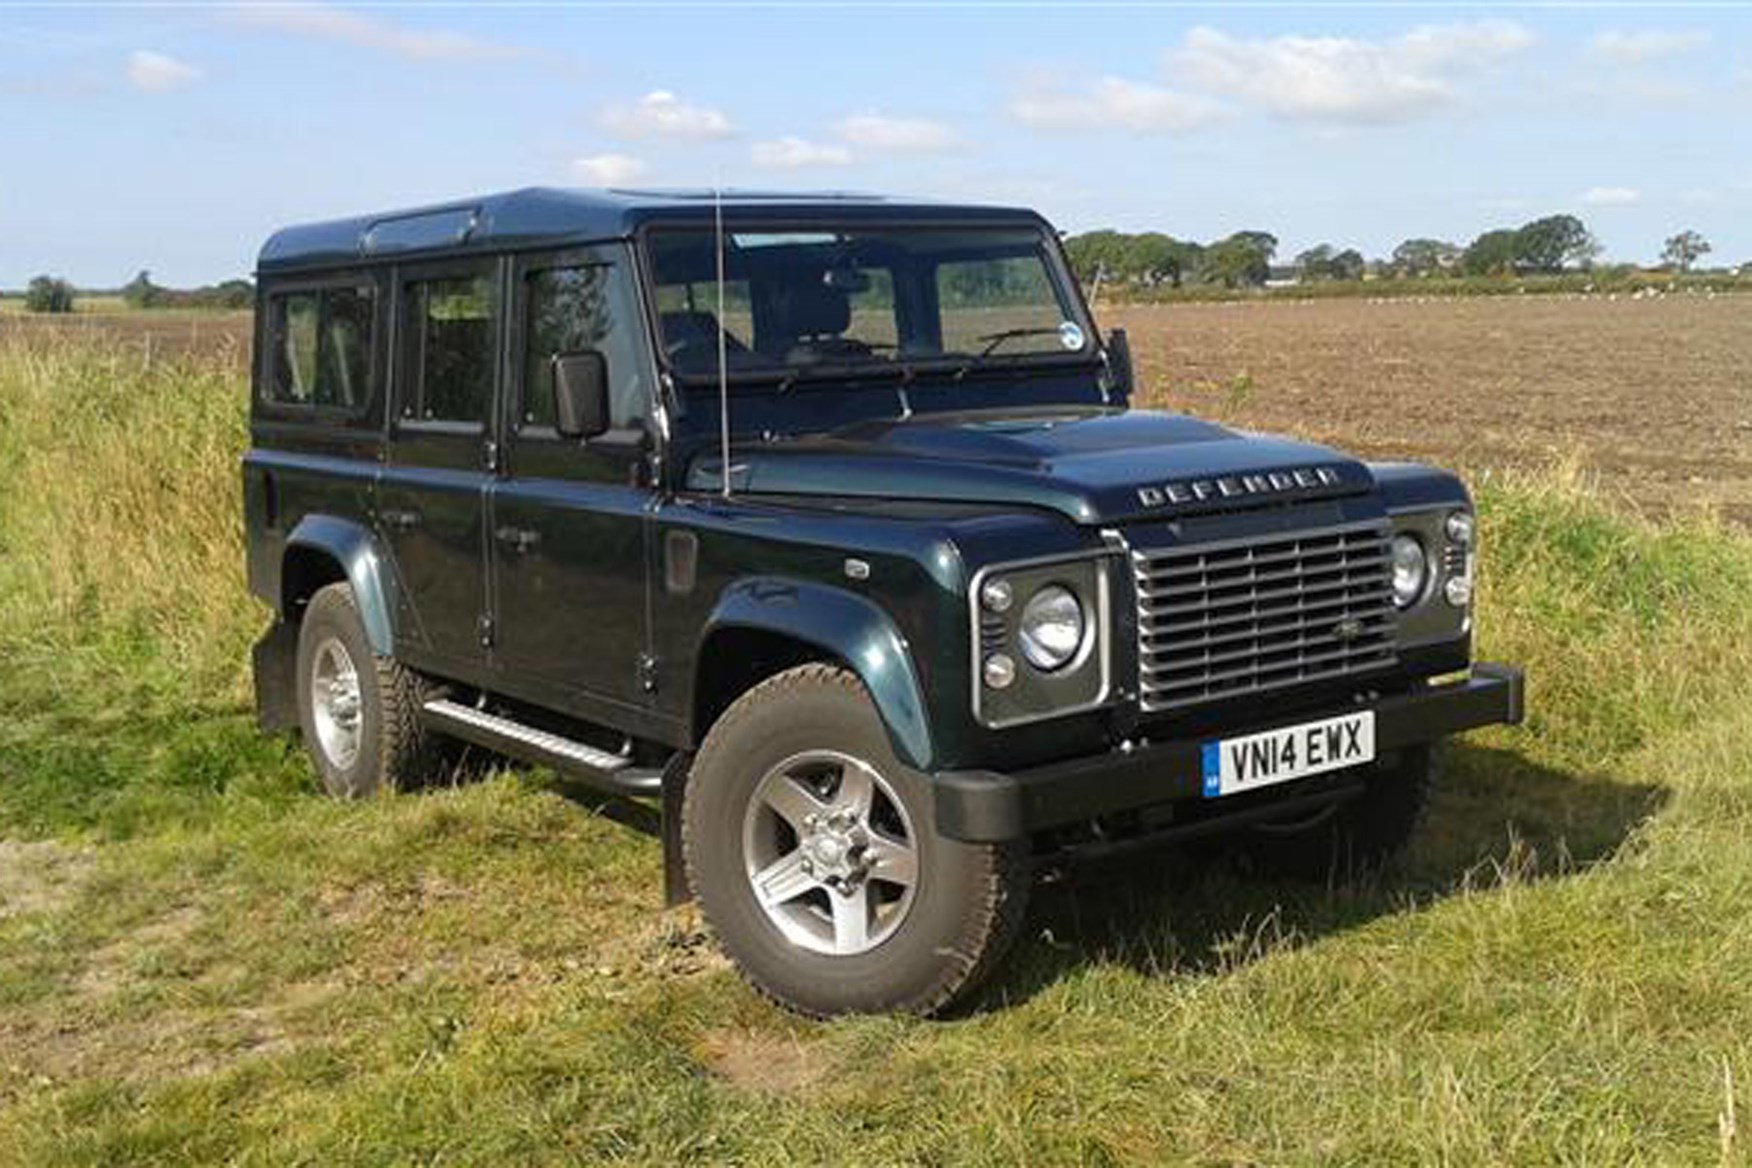 Land Rover Defender review on Parkers Vans - 110 double cab exterior